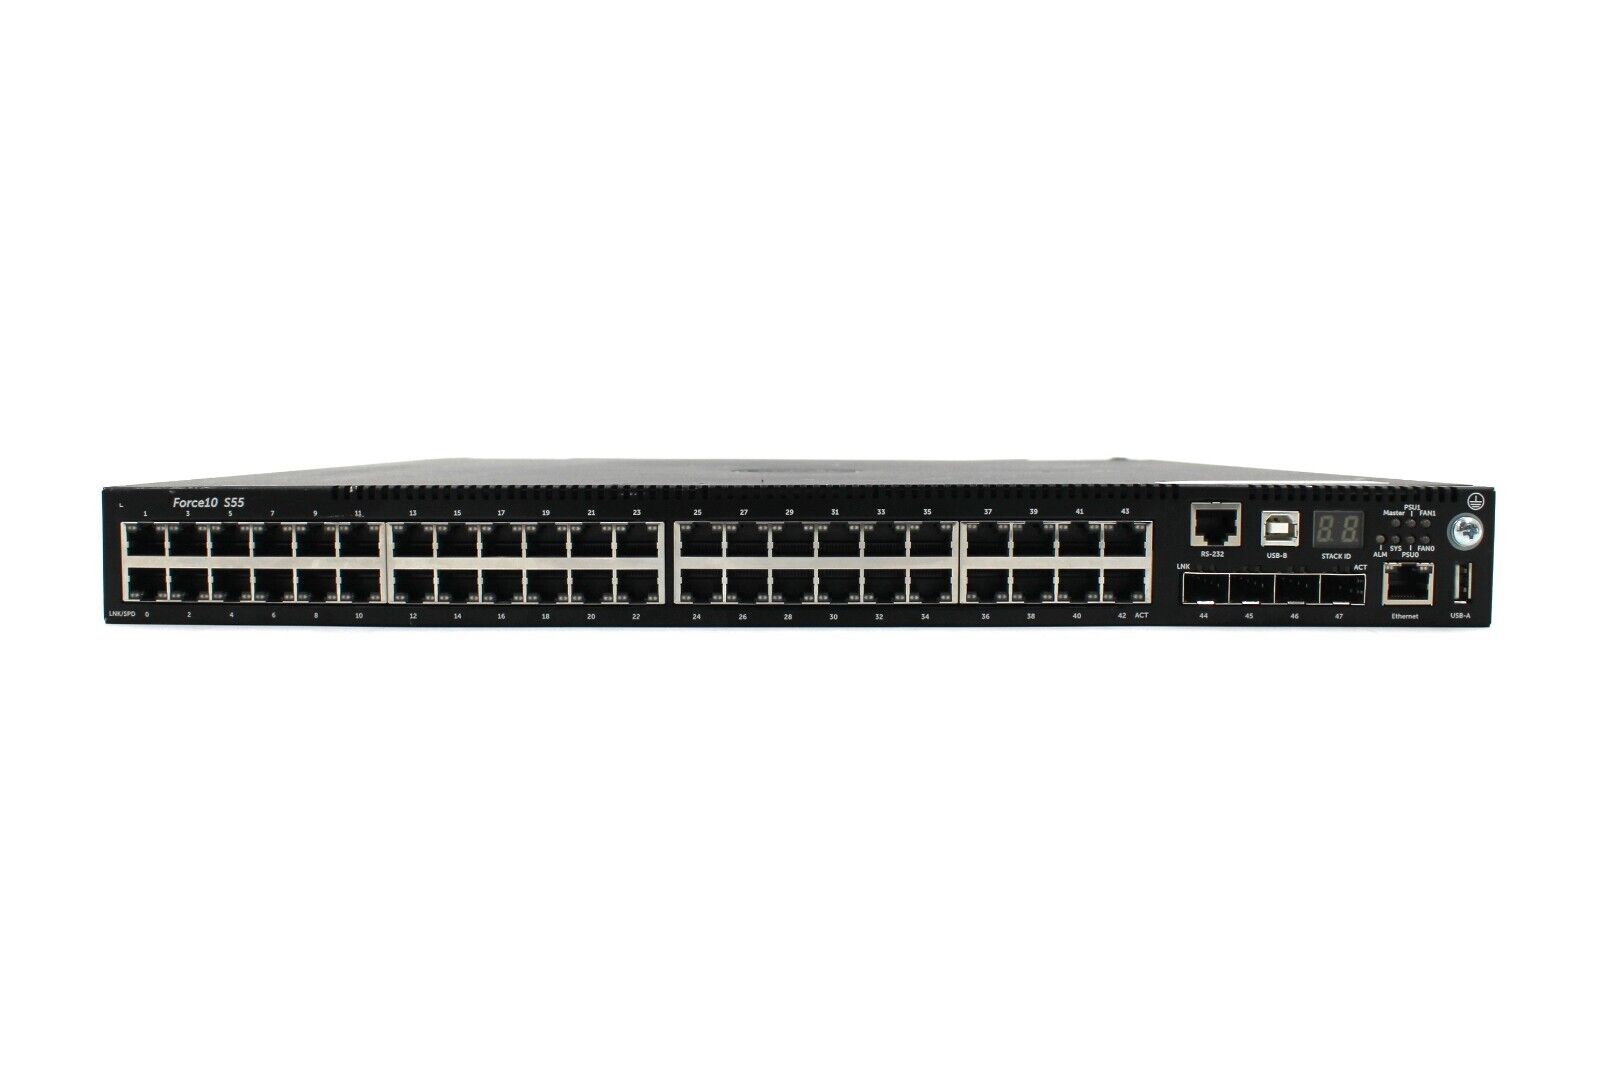 Dell Force10 S55T 44-Port 10/100/1000 Gigabit Managed Network Switch TESTED